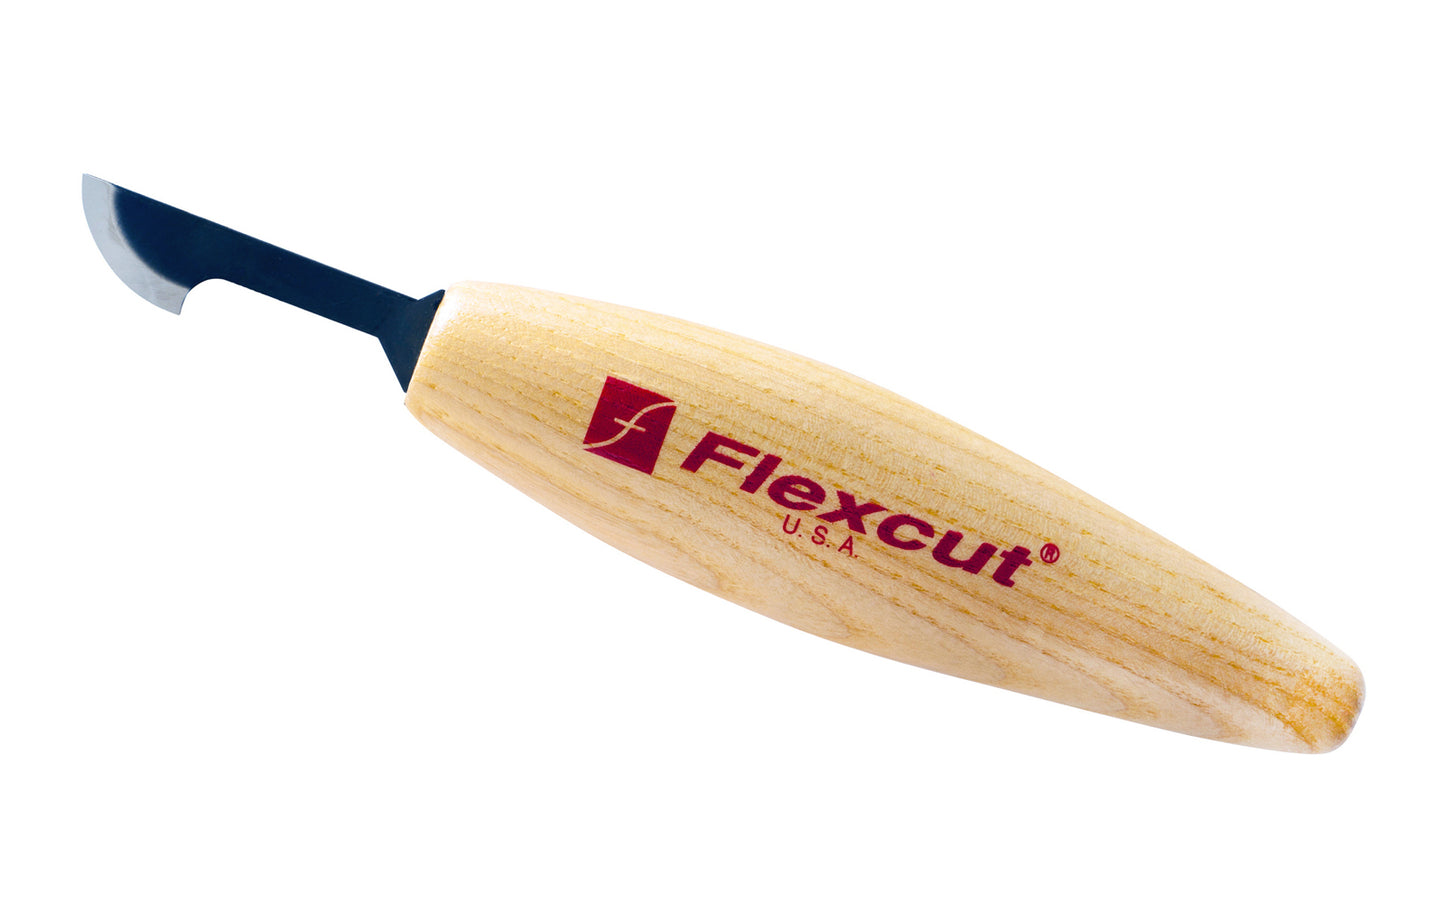 Flexcut Hooked Skewed Carving Knife ~ KN37 - Made in USA ~ 13/16" (21 mm) bevel blade length - High Carbon Spring Steel blade - Tempered to HRC 59-61 ~ Hooked radial bevel & is perfect for waterfowl carving & cleaning - It also can be used to make V-cuts using a rolling action - Waterfowl Carving Knife ~ 651646500371